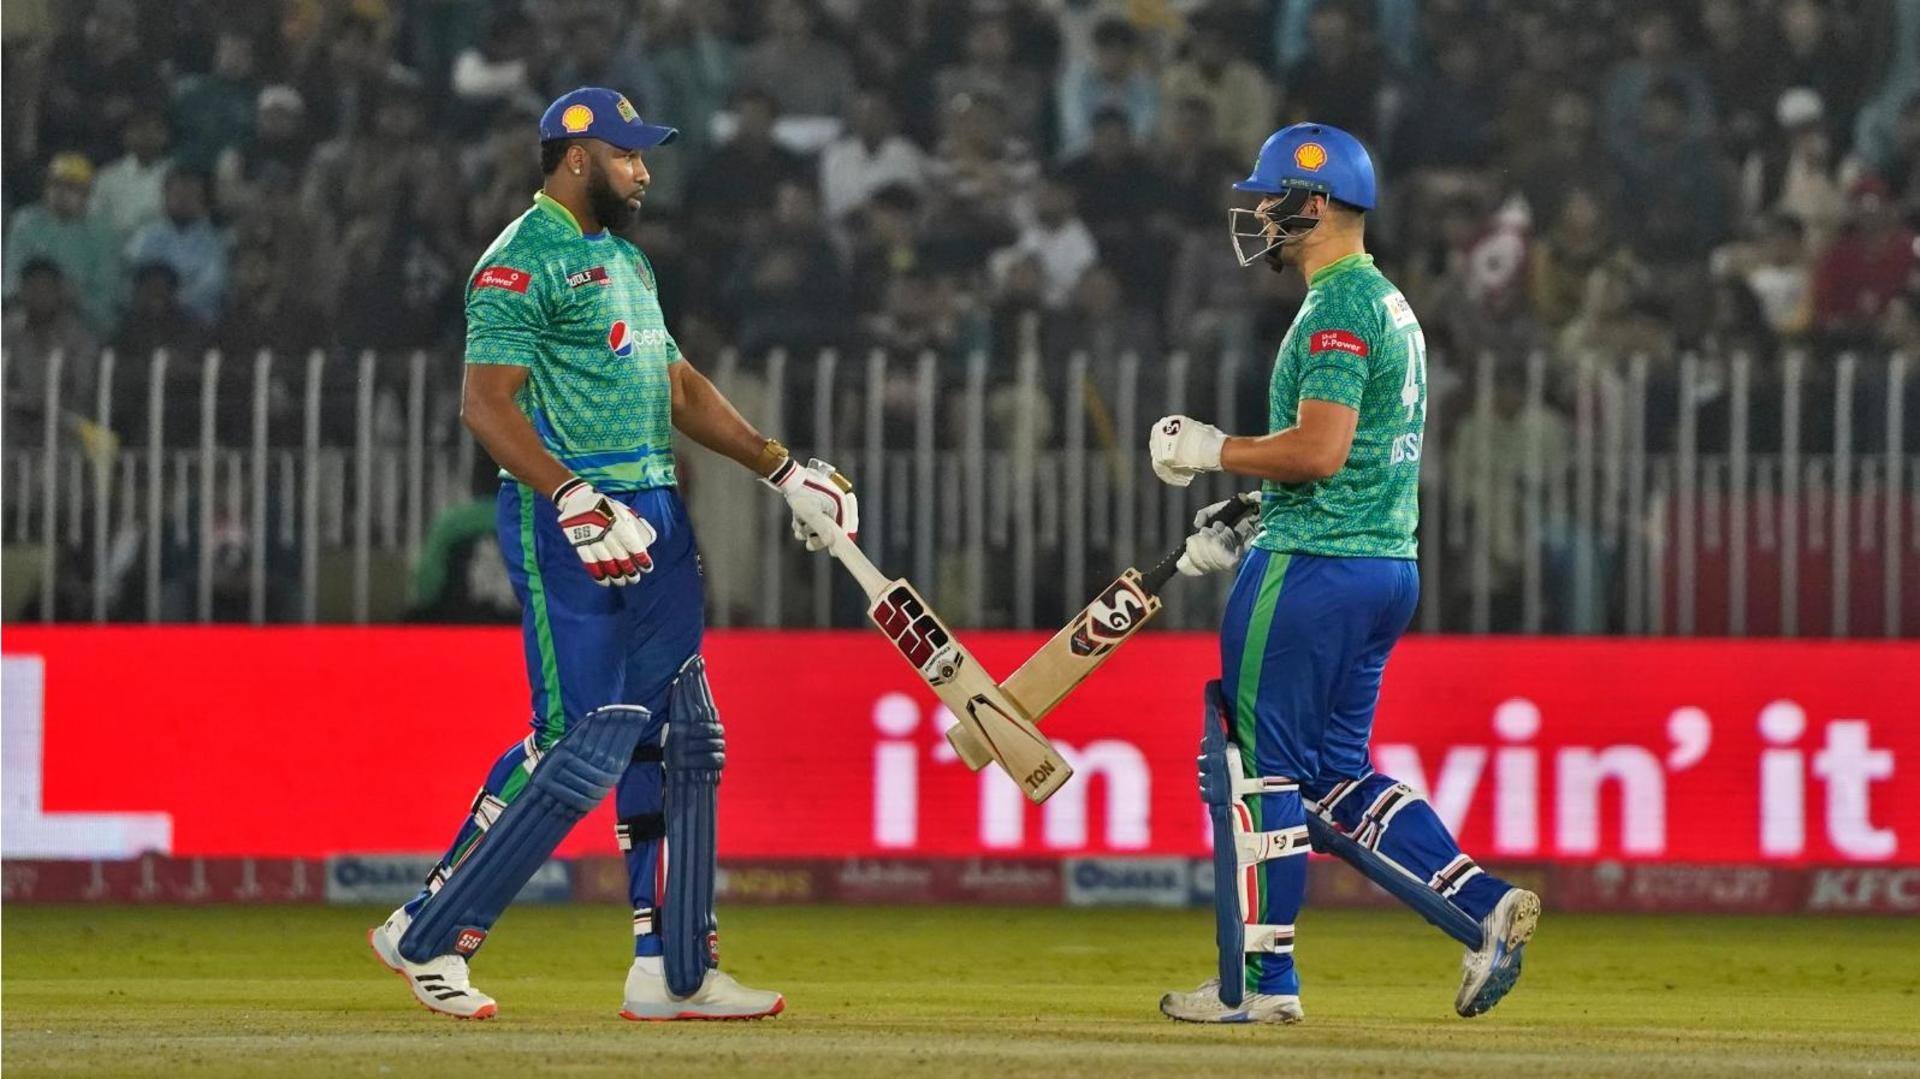 Multan Sultans script joint-second-highest successful chase in T20s: Key stats 